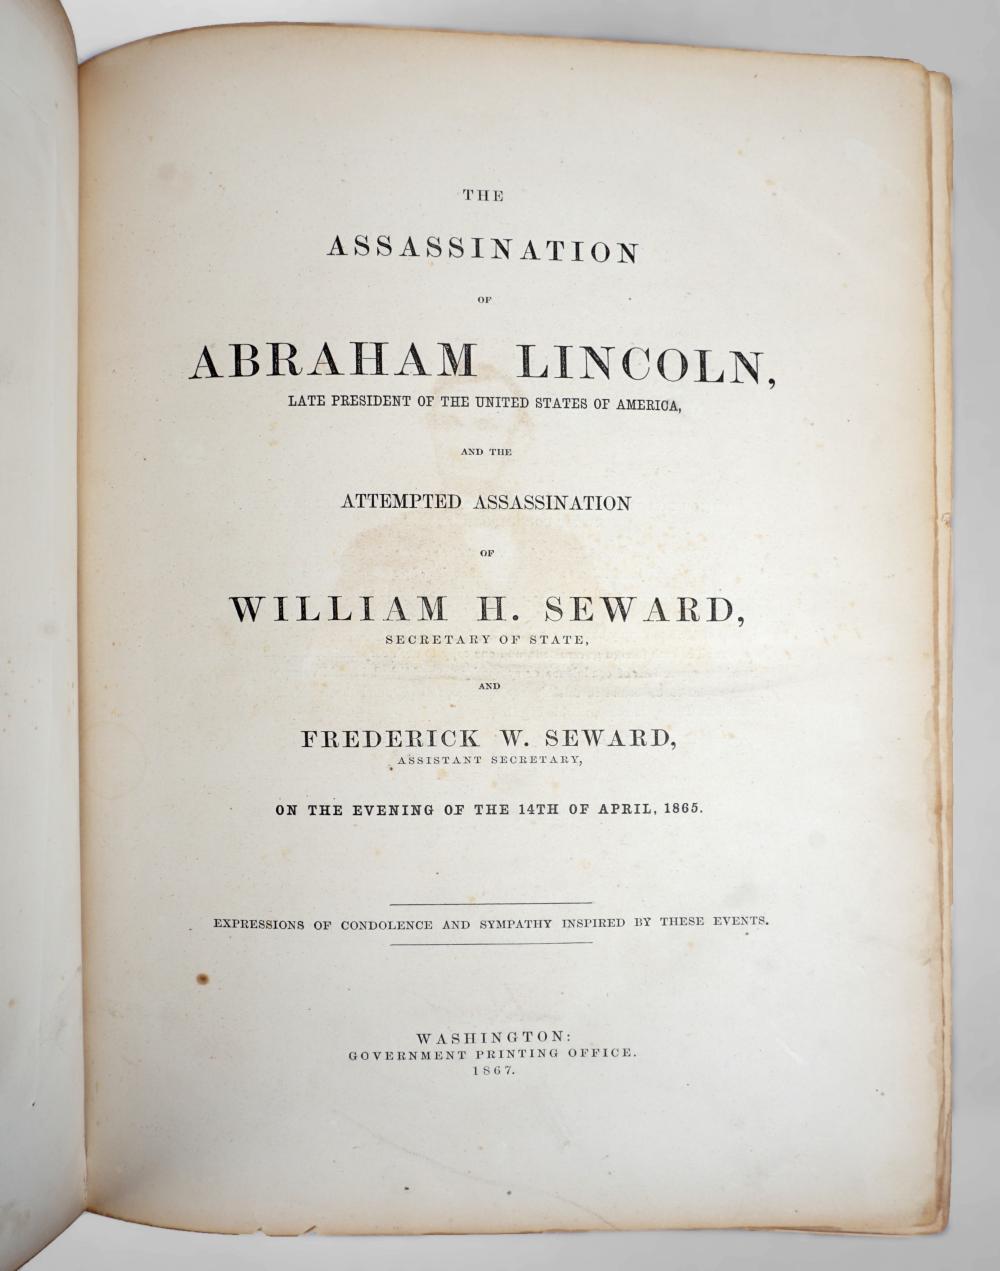 THE ASSASSINATION OF ABRAHAM LINCOLN  2ebf82